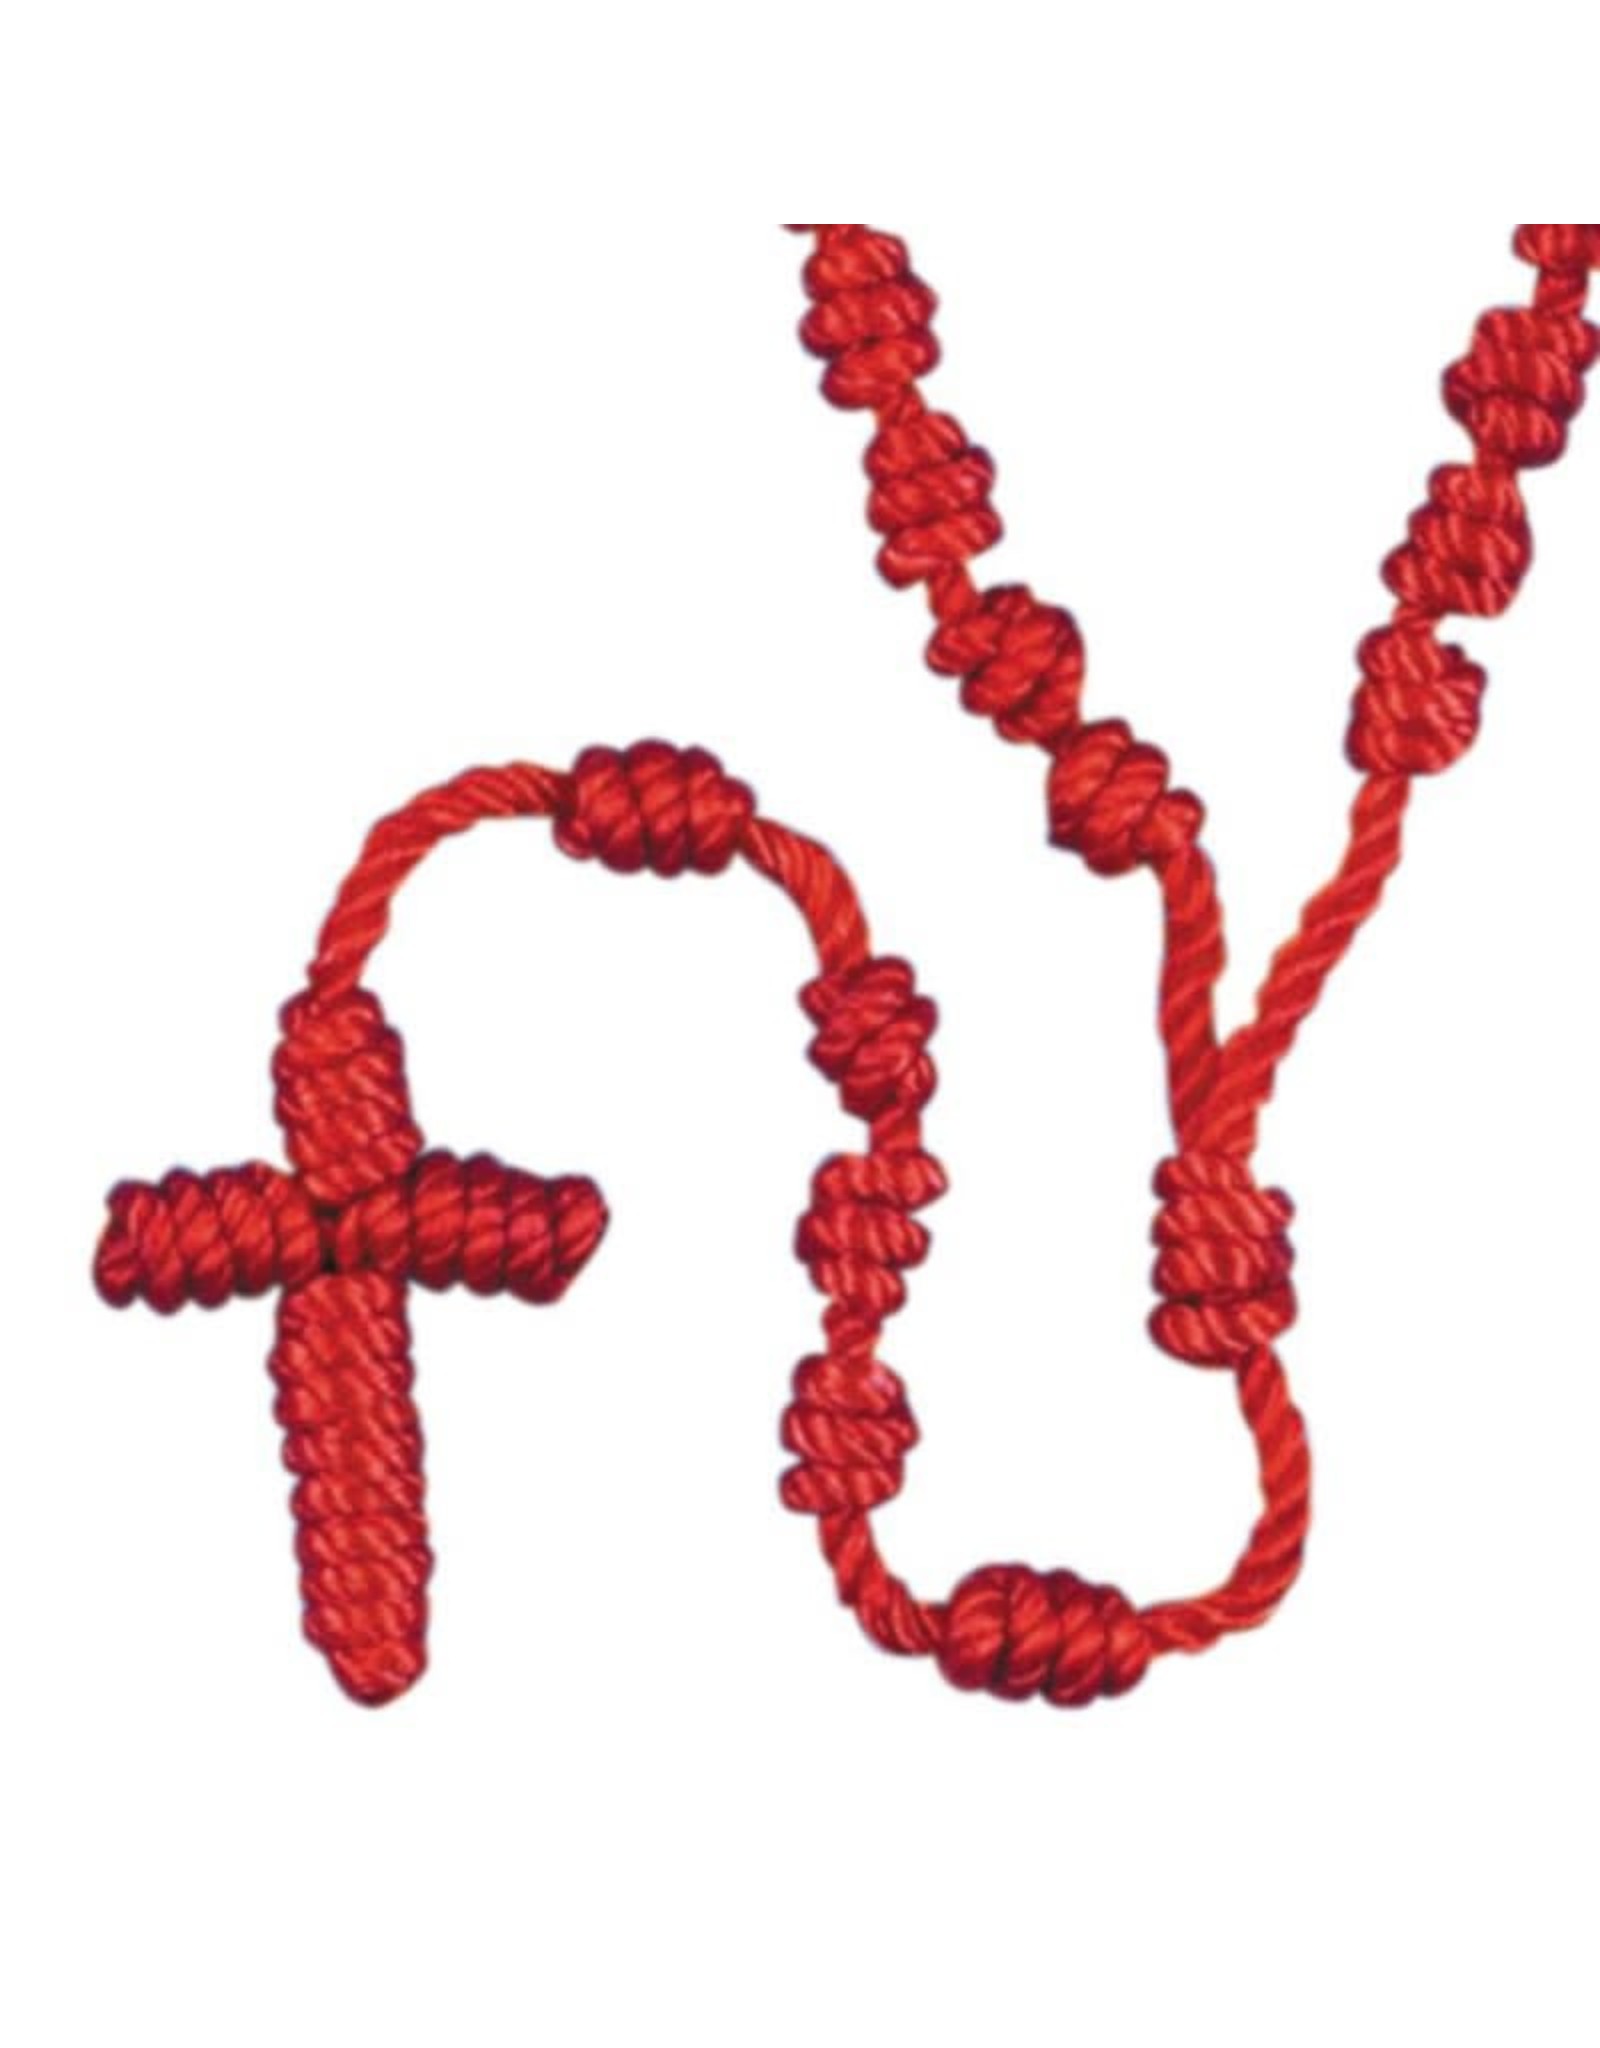 CBC - A Red Knotted Cord Rosary